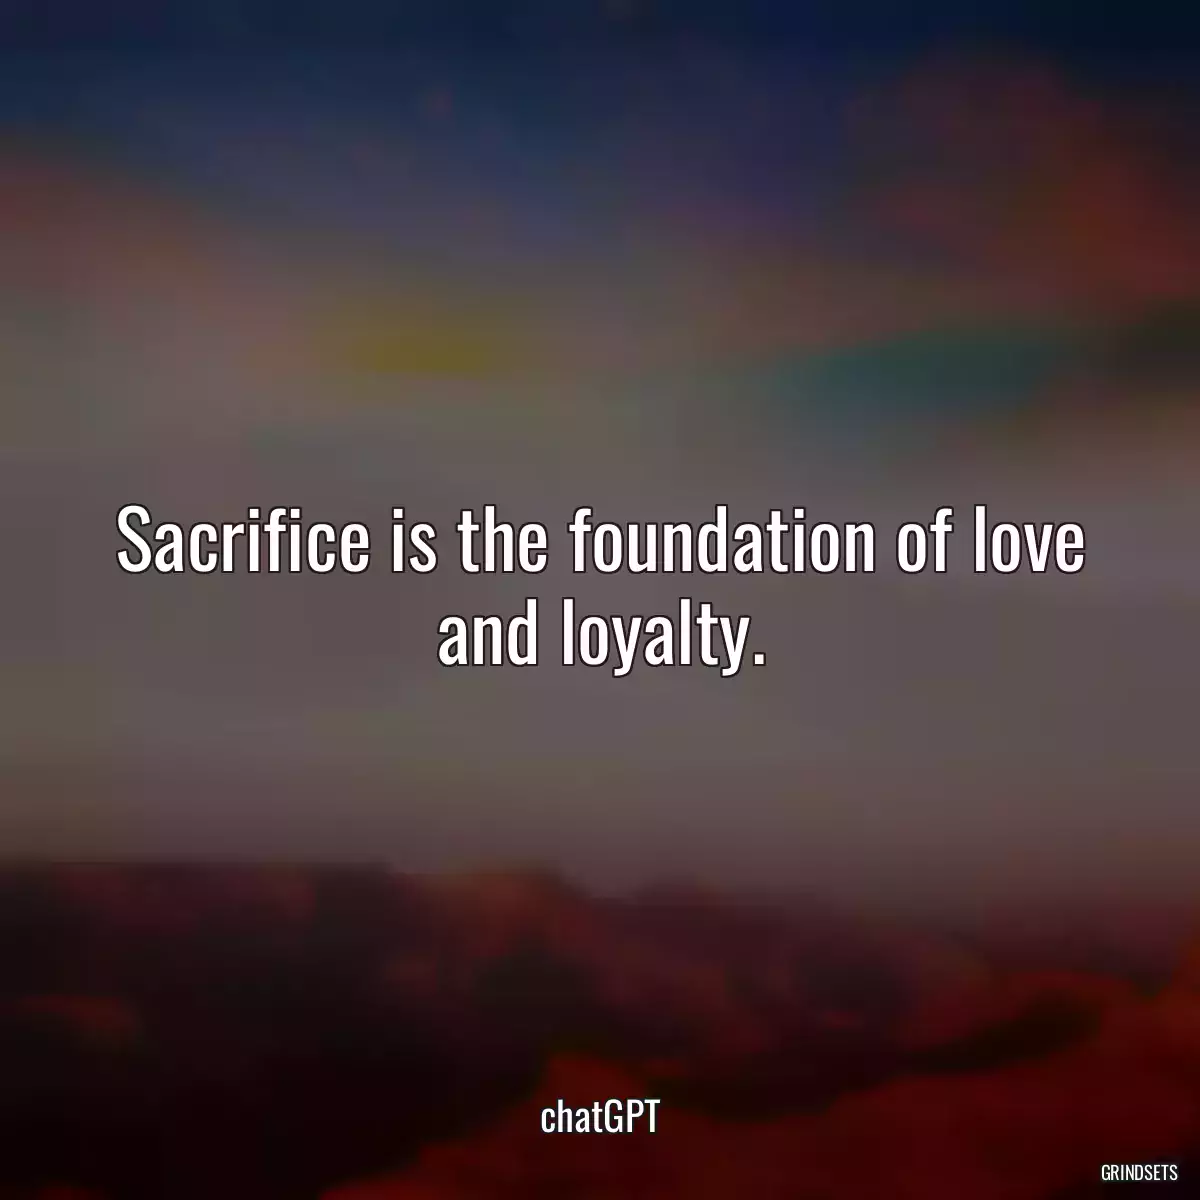 Sacrifice is the foundation of love and loyalty.